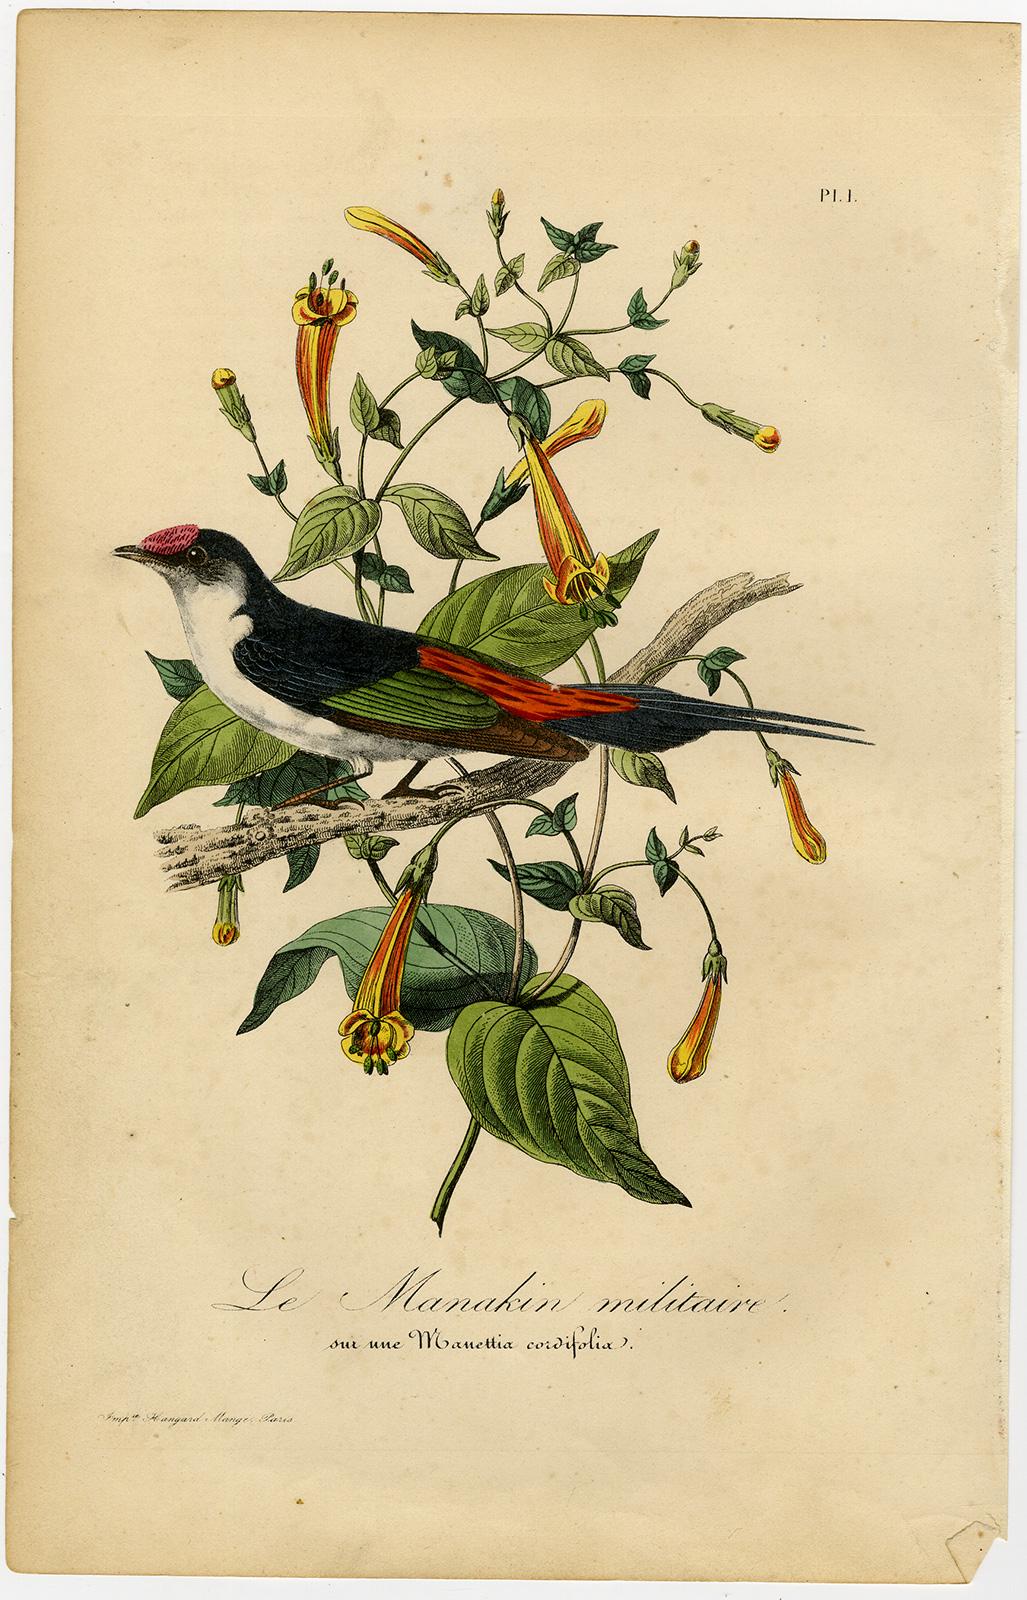 Antique print of a pin-tailed manakin by Le Maout - Engraving - 19th c. - Print by Jean-Emmanuel-Marie Le Maout